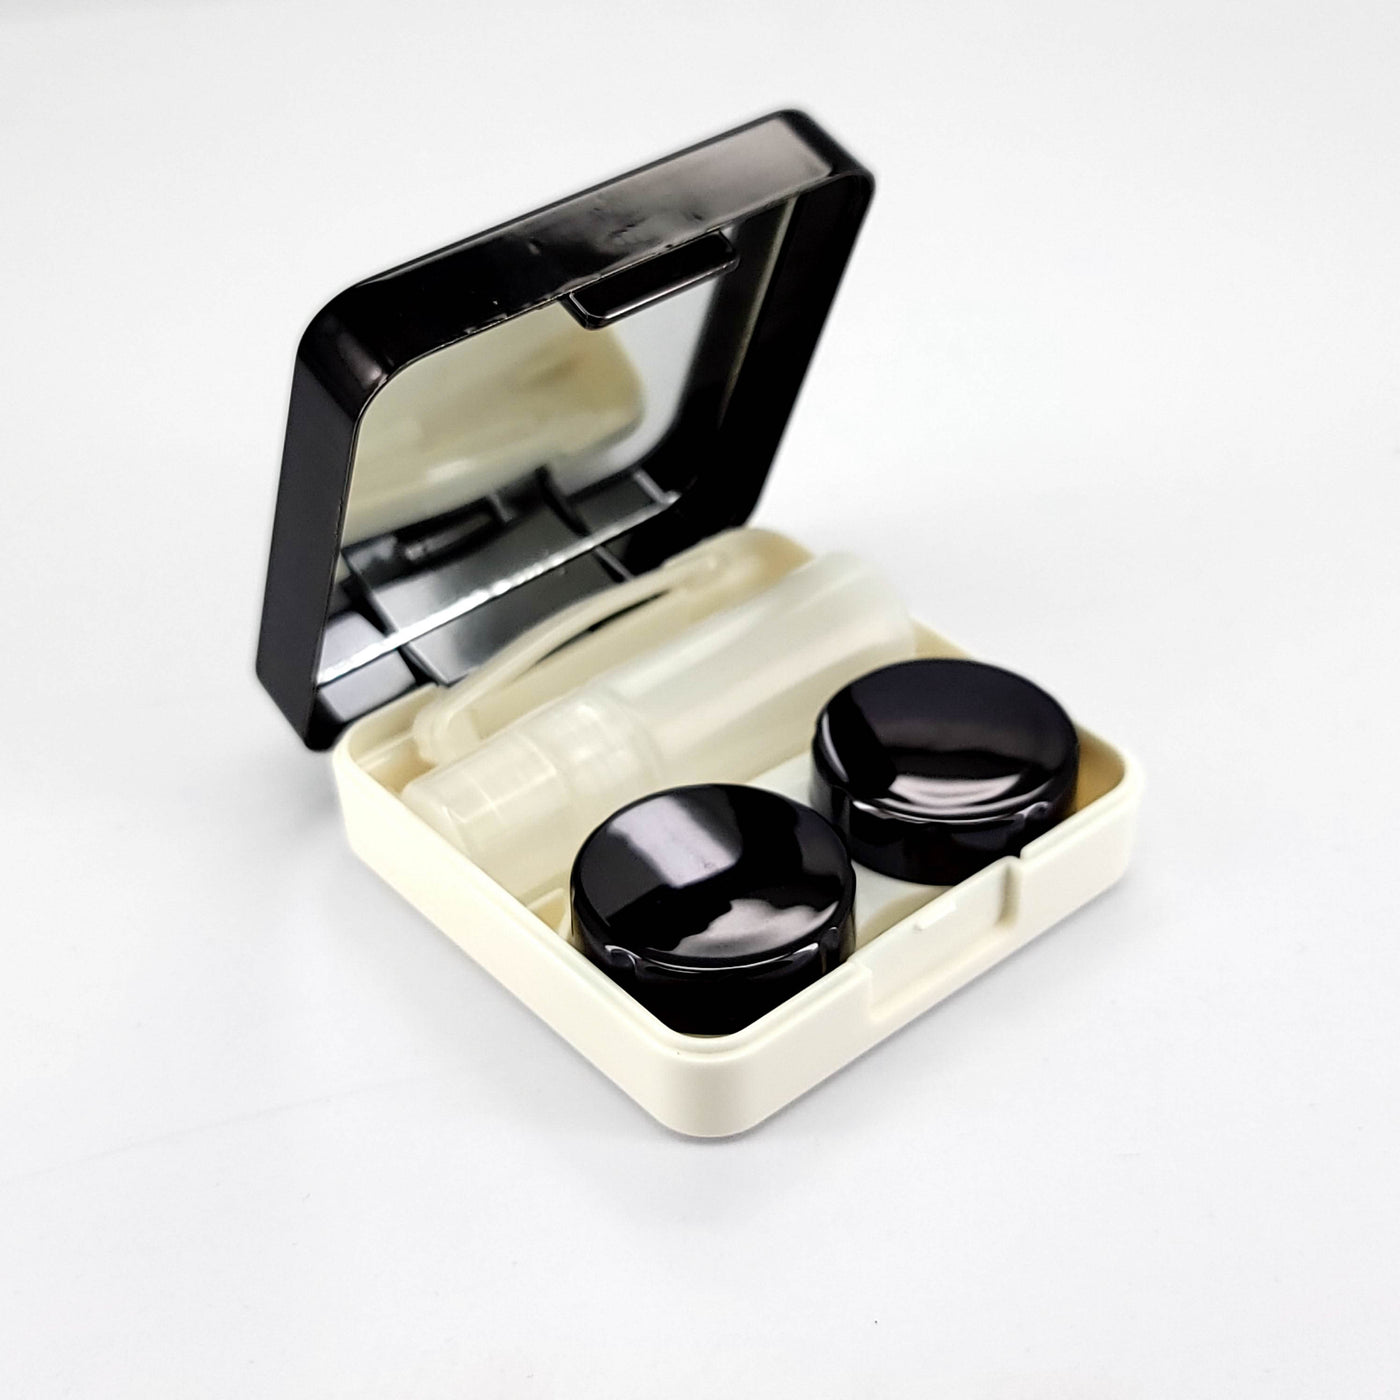 Crystal Contact Lens Kit | Accessories - Vision Express Optical Philippines